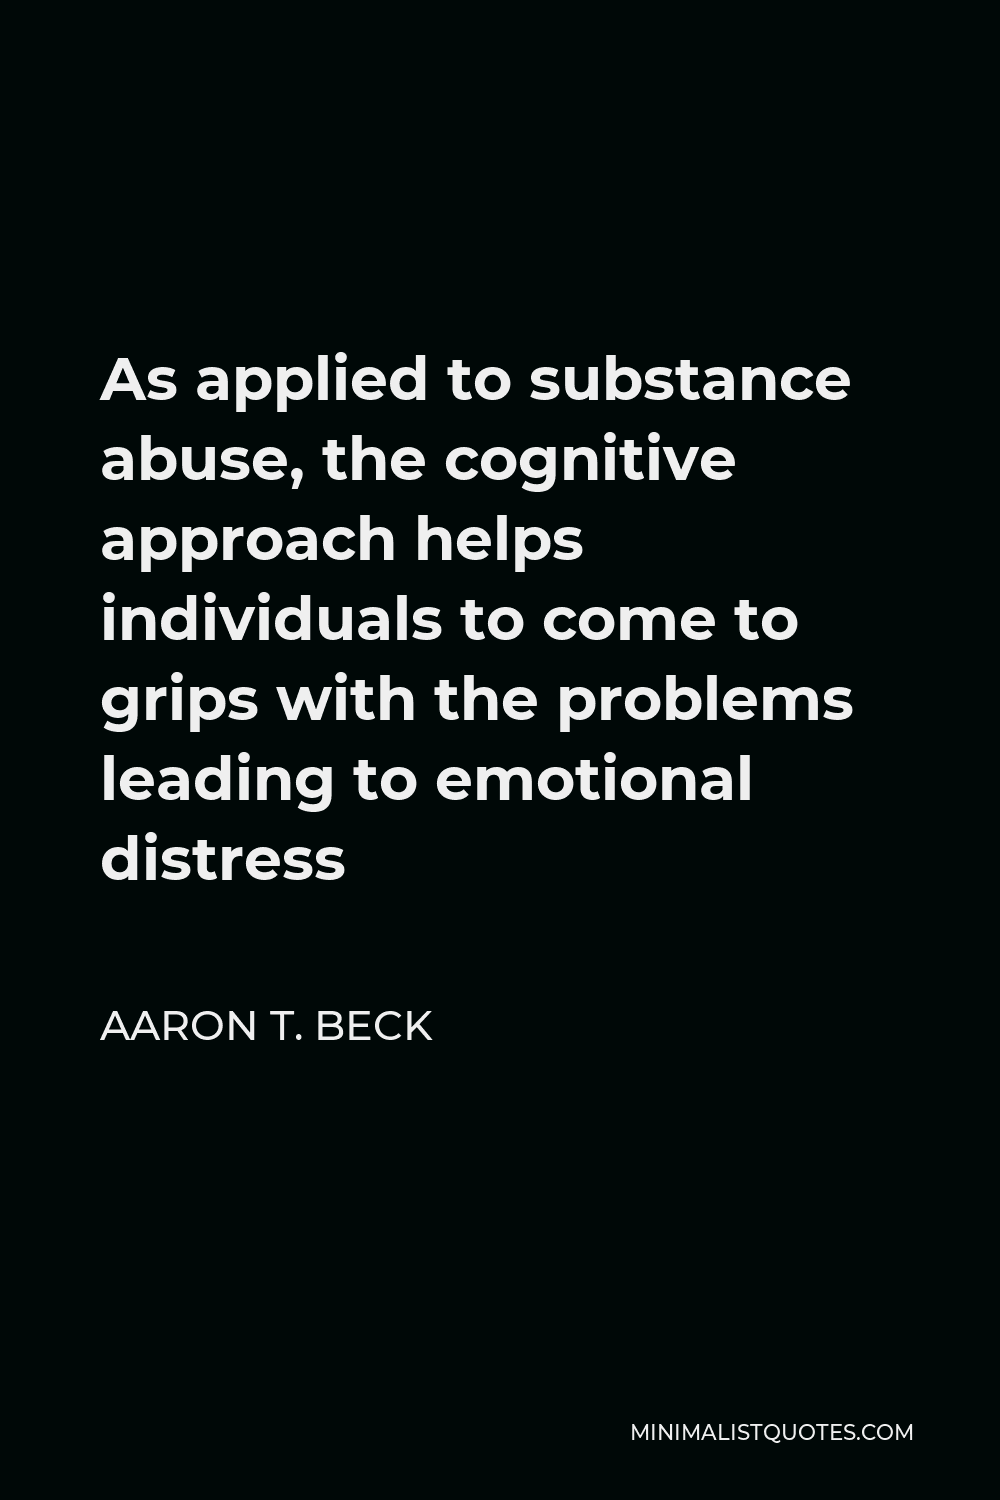 Aaron T. Beck Quote - As applied to substance abuse, the cognitive approach helps individuals to come to grips with the problems leading to emotional distress